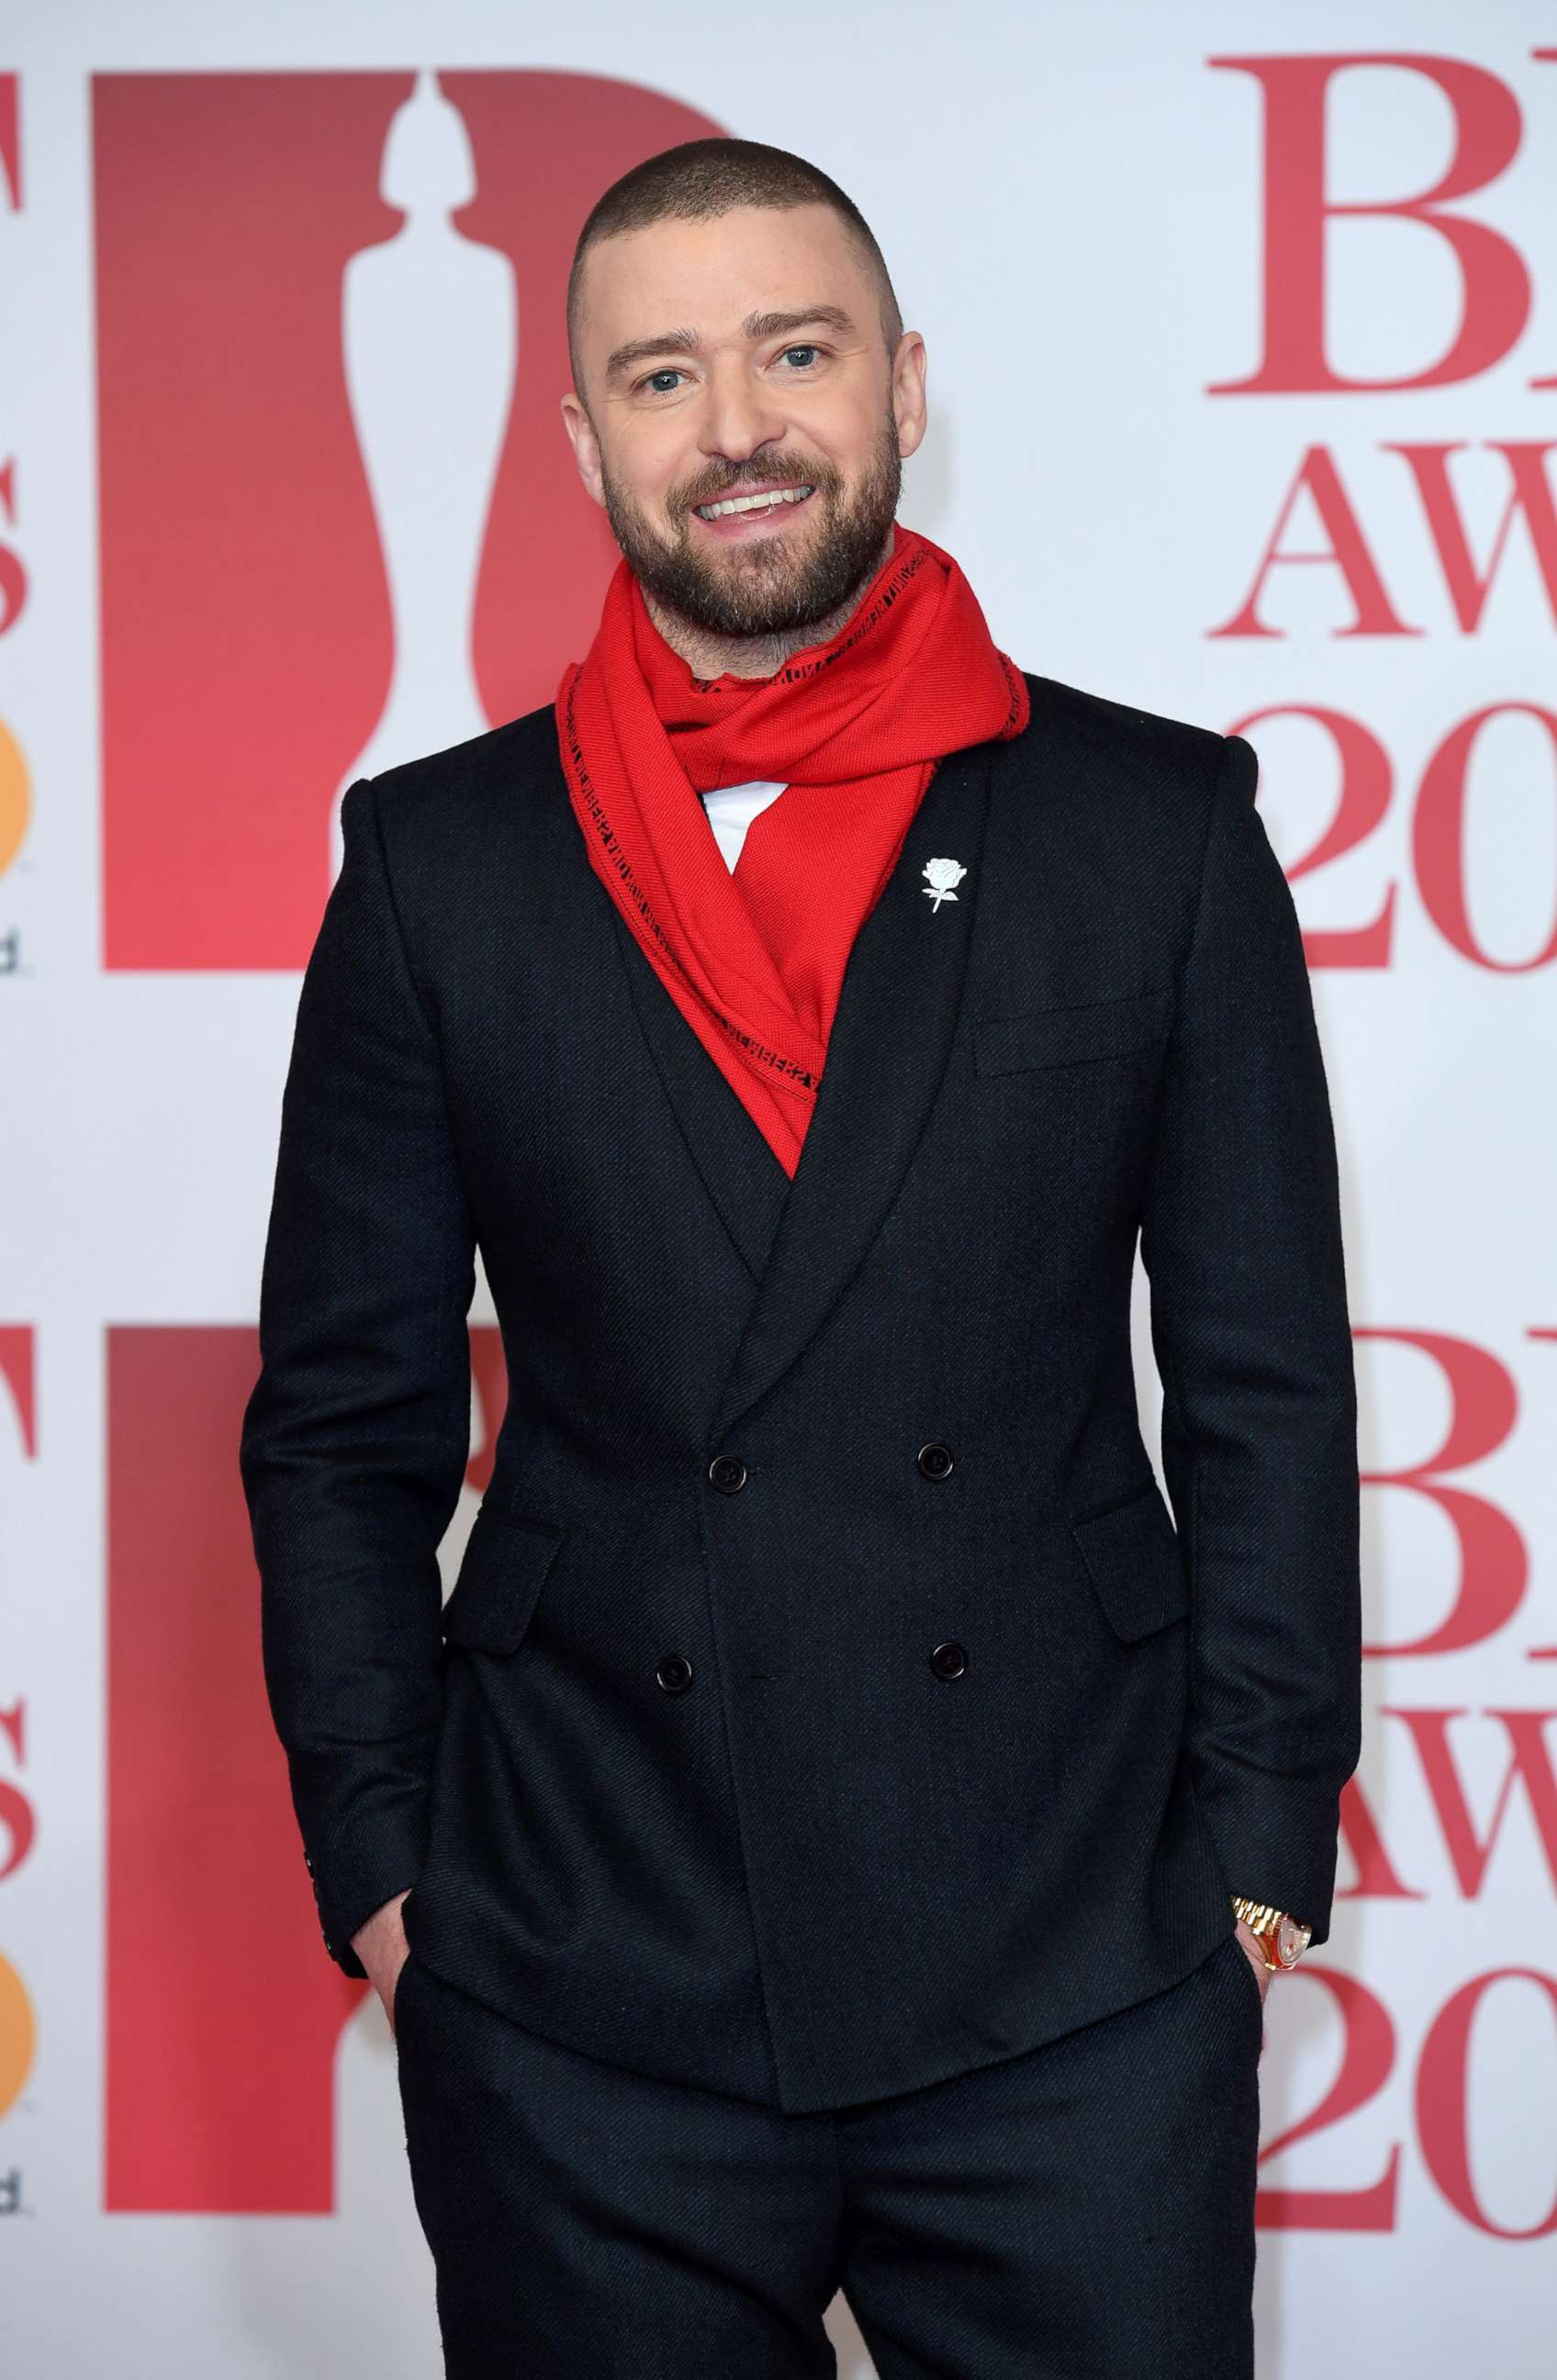 PHOTO: Justin Timberlake attends The BRIT Awards 2018 held at The O2 Arena on Feb. 21, 2018 in London.  